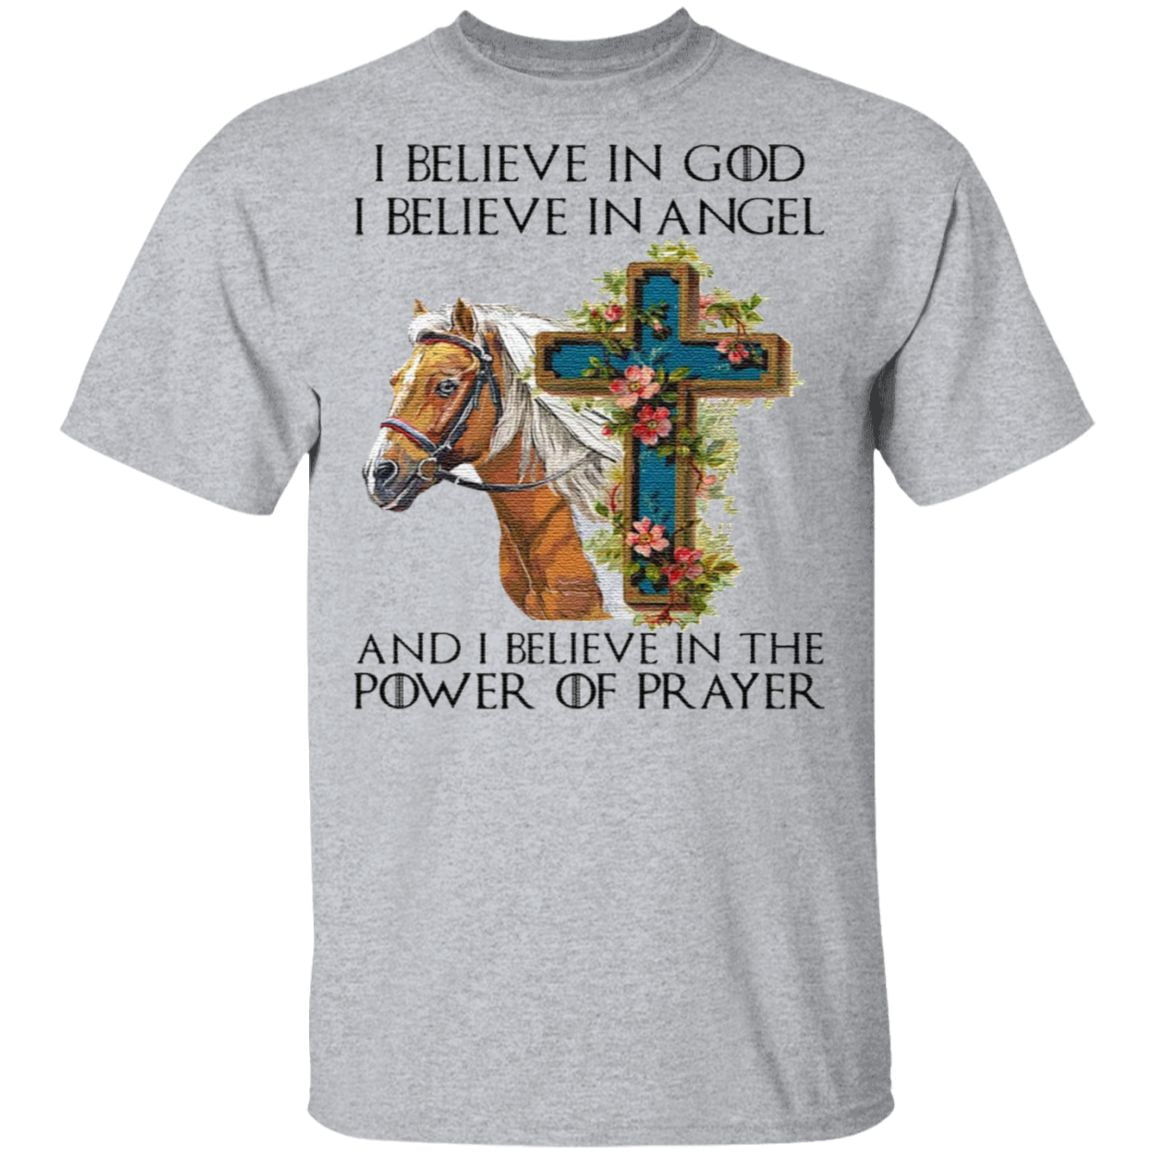 I Believe In God I Believe In Angel And I Believe In The Power Of Prayer T Shirt